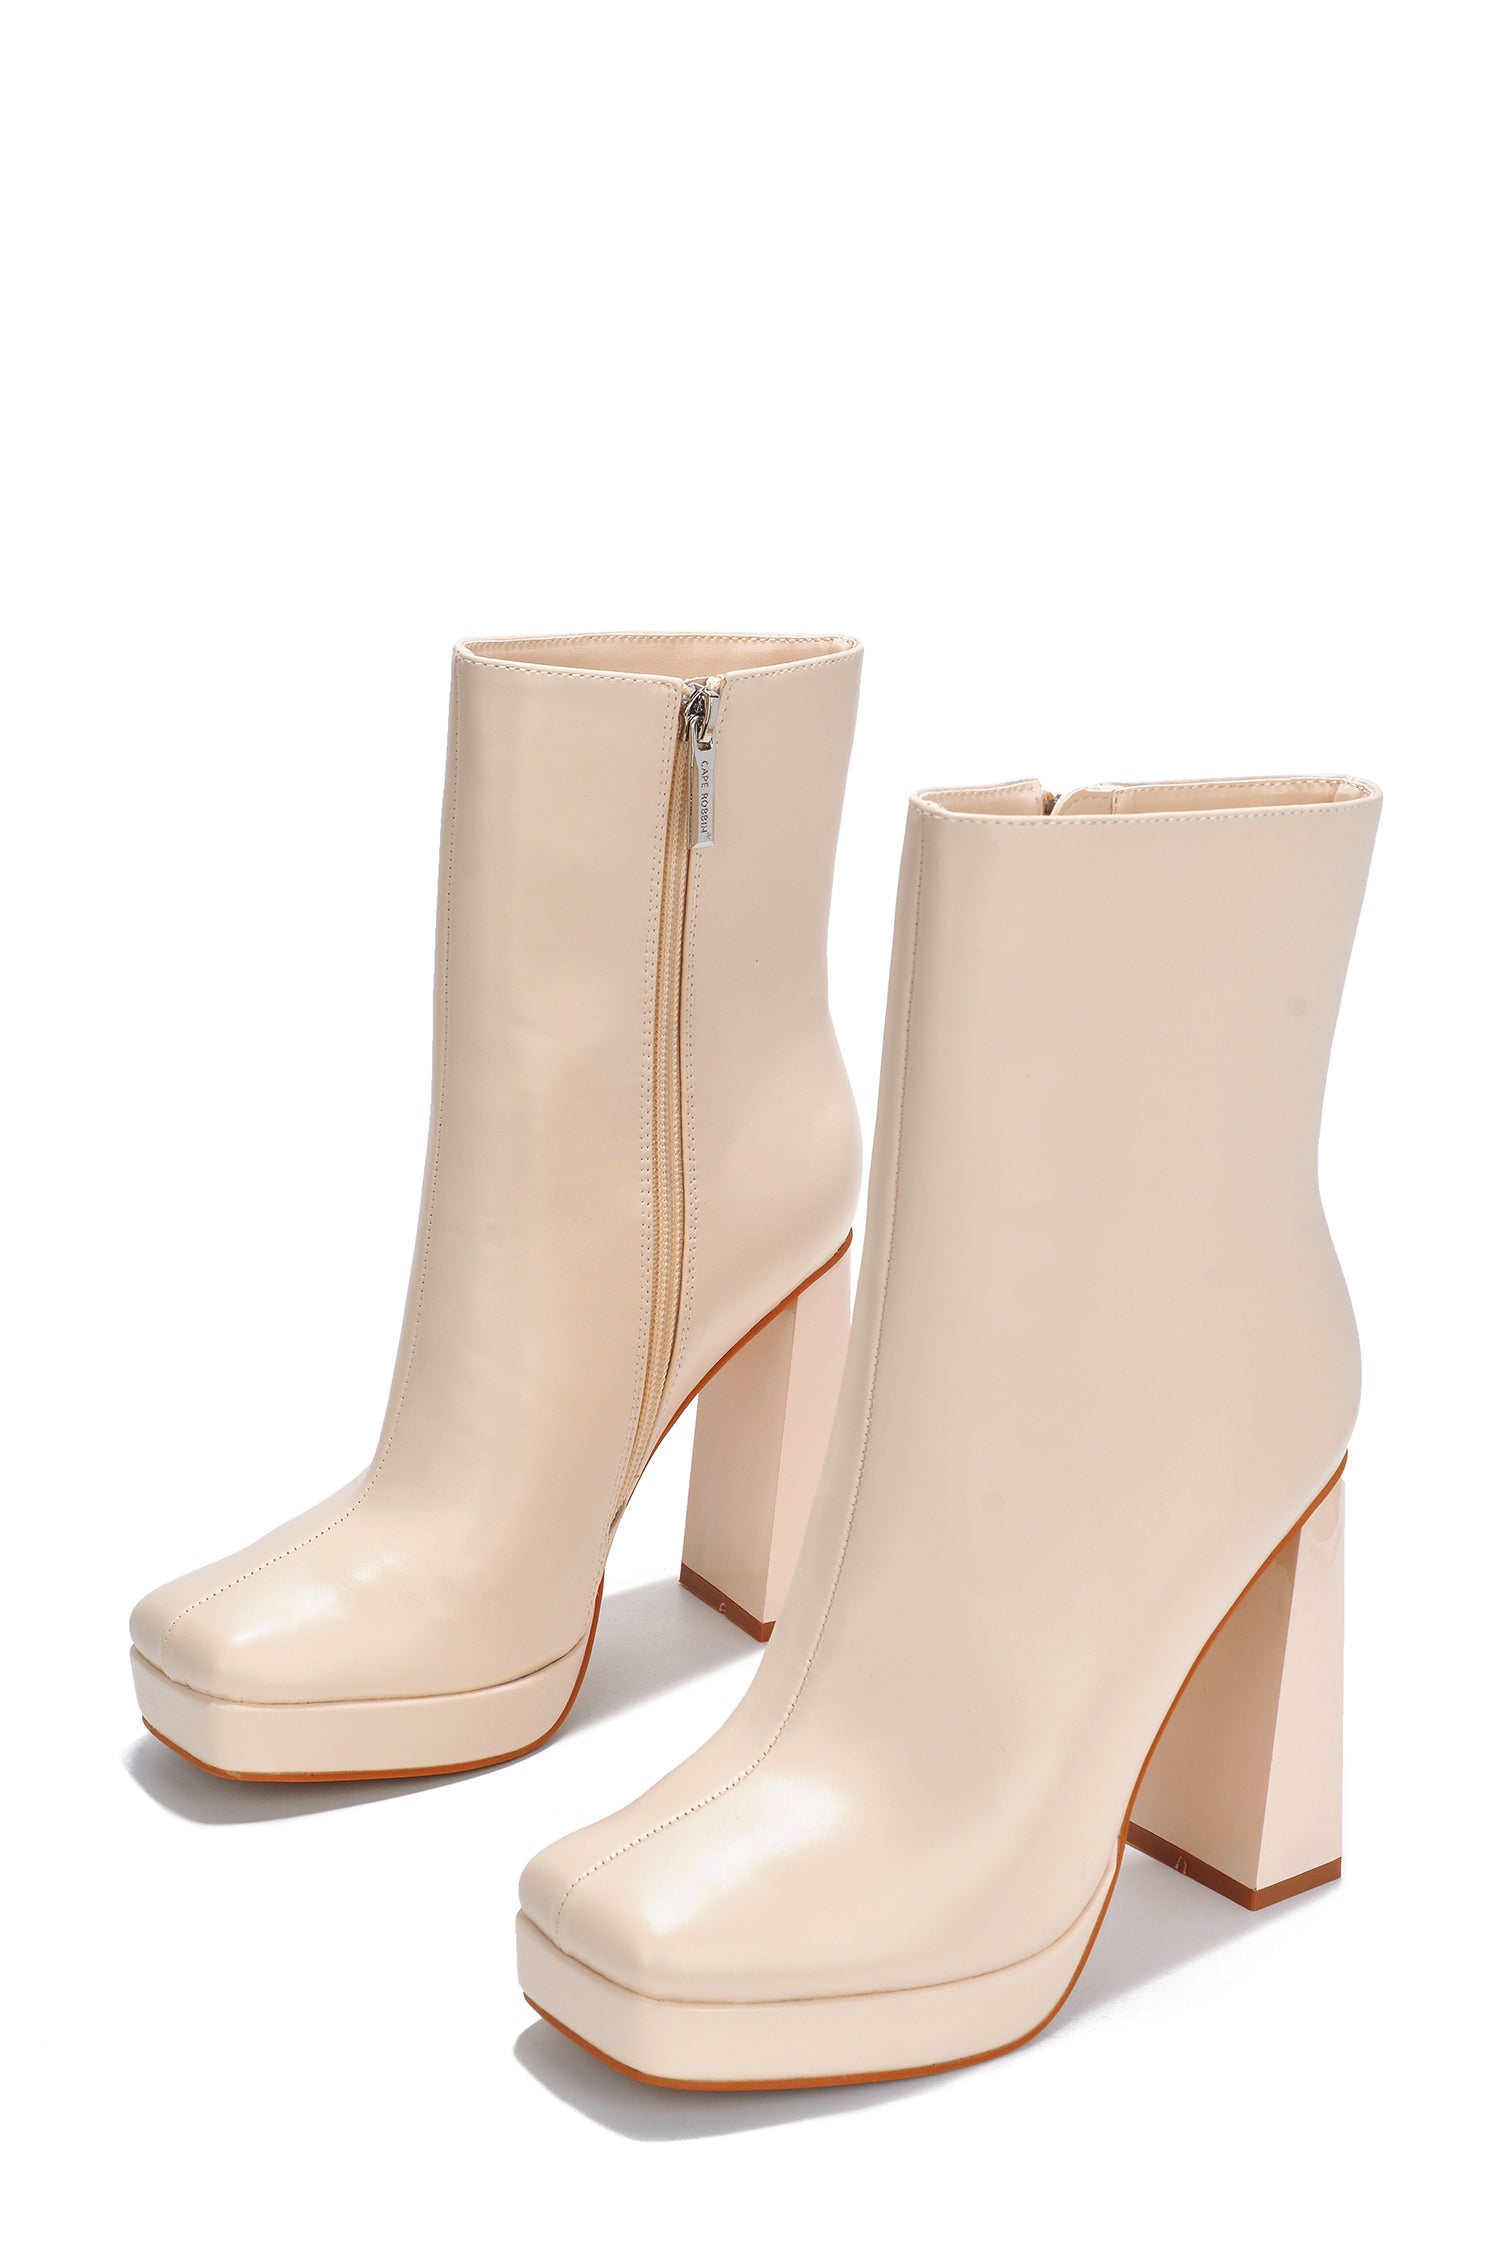 Cape Robbin - TRUDY - IVORY - BOOTIES